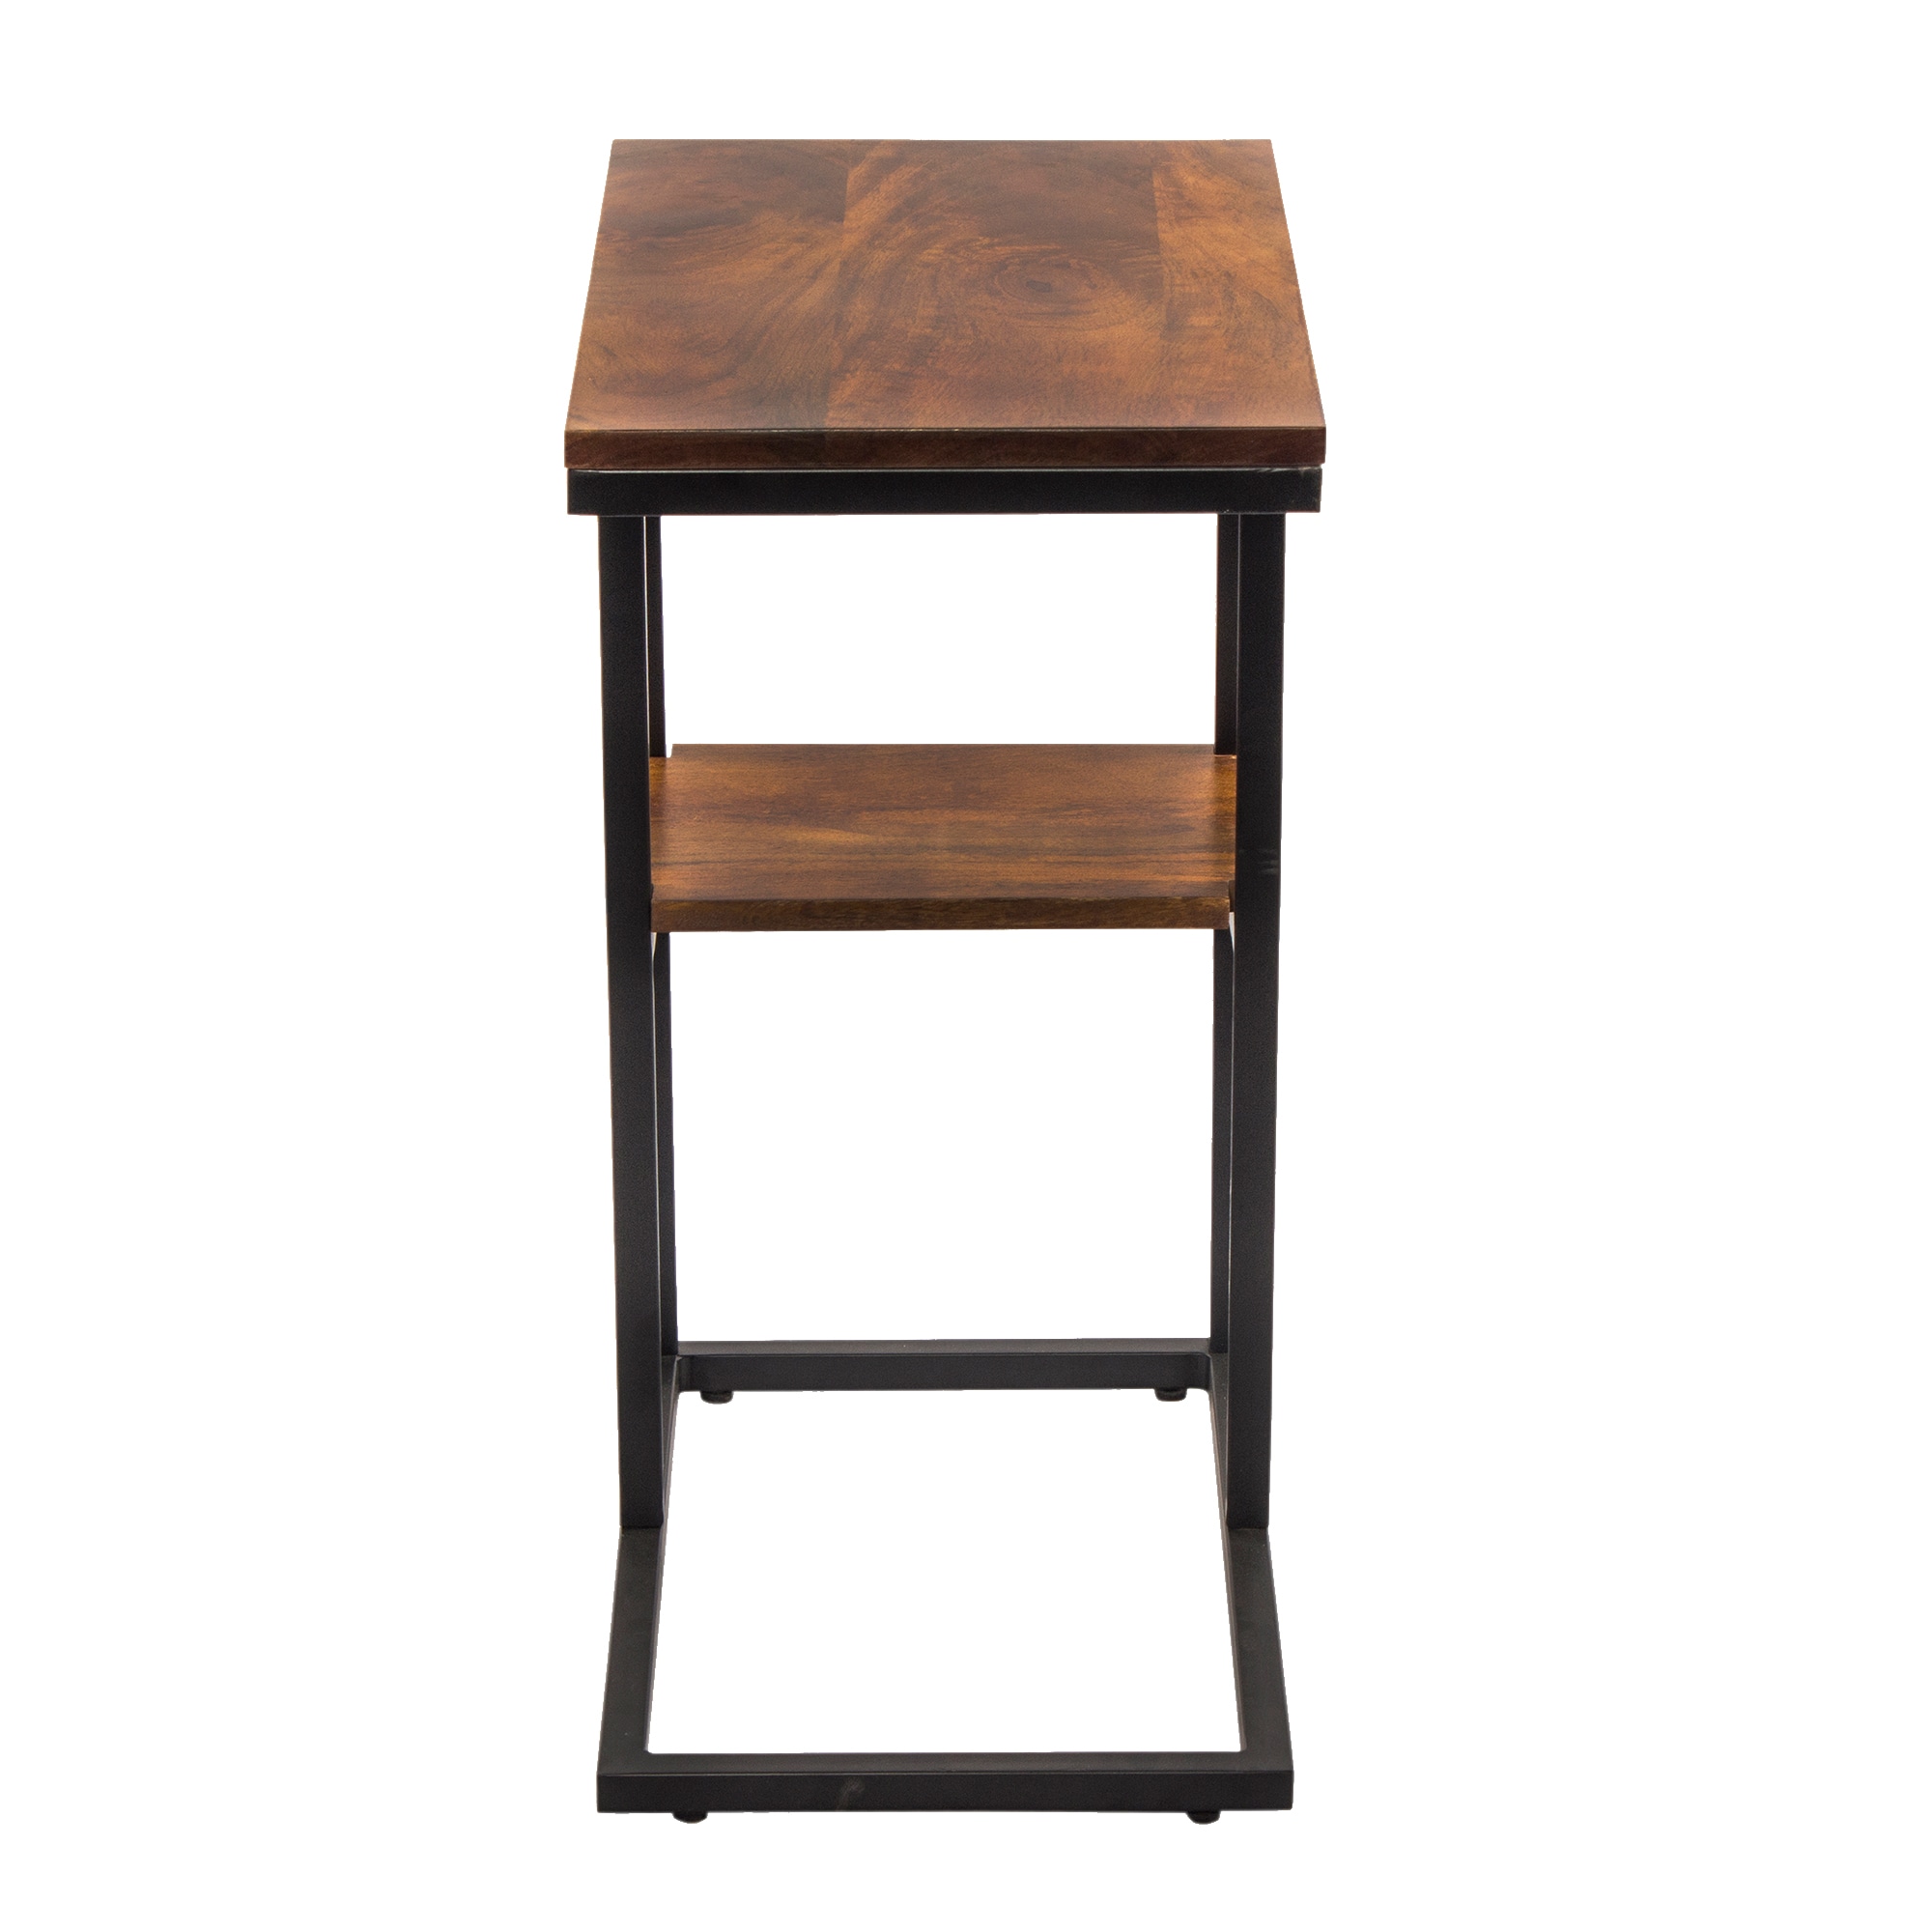 Benzara 12-in W x 25-in H Brown Wood Modern End Table with Storage ...